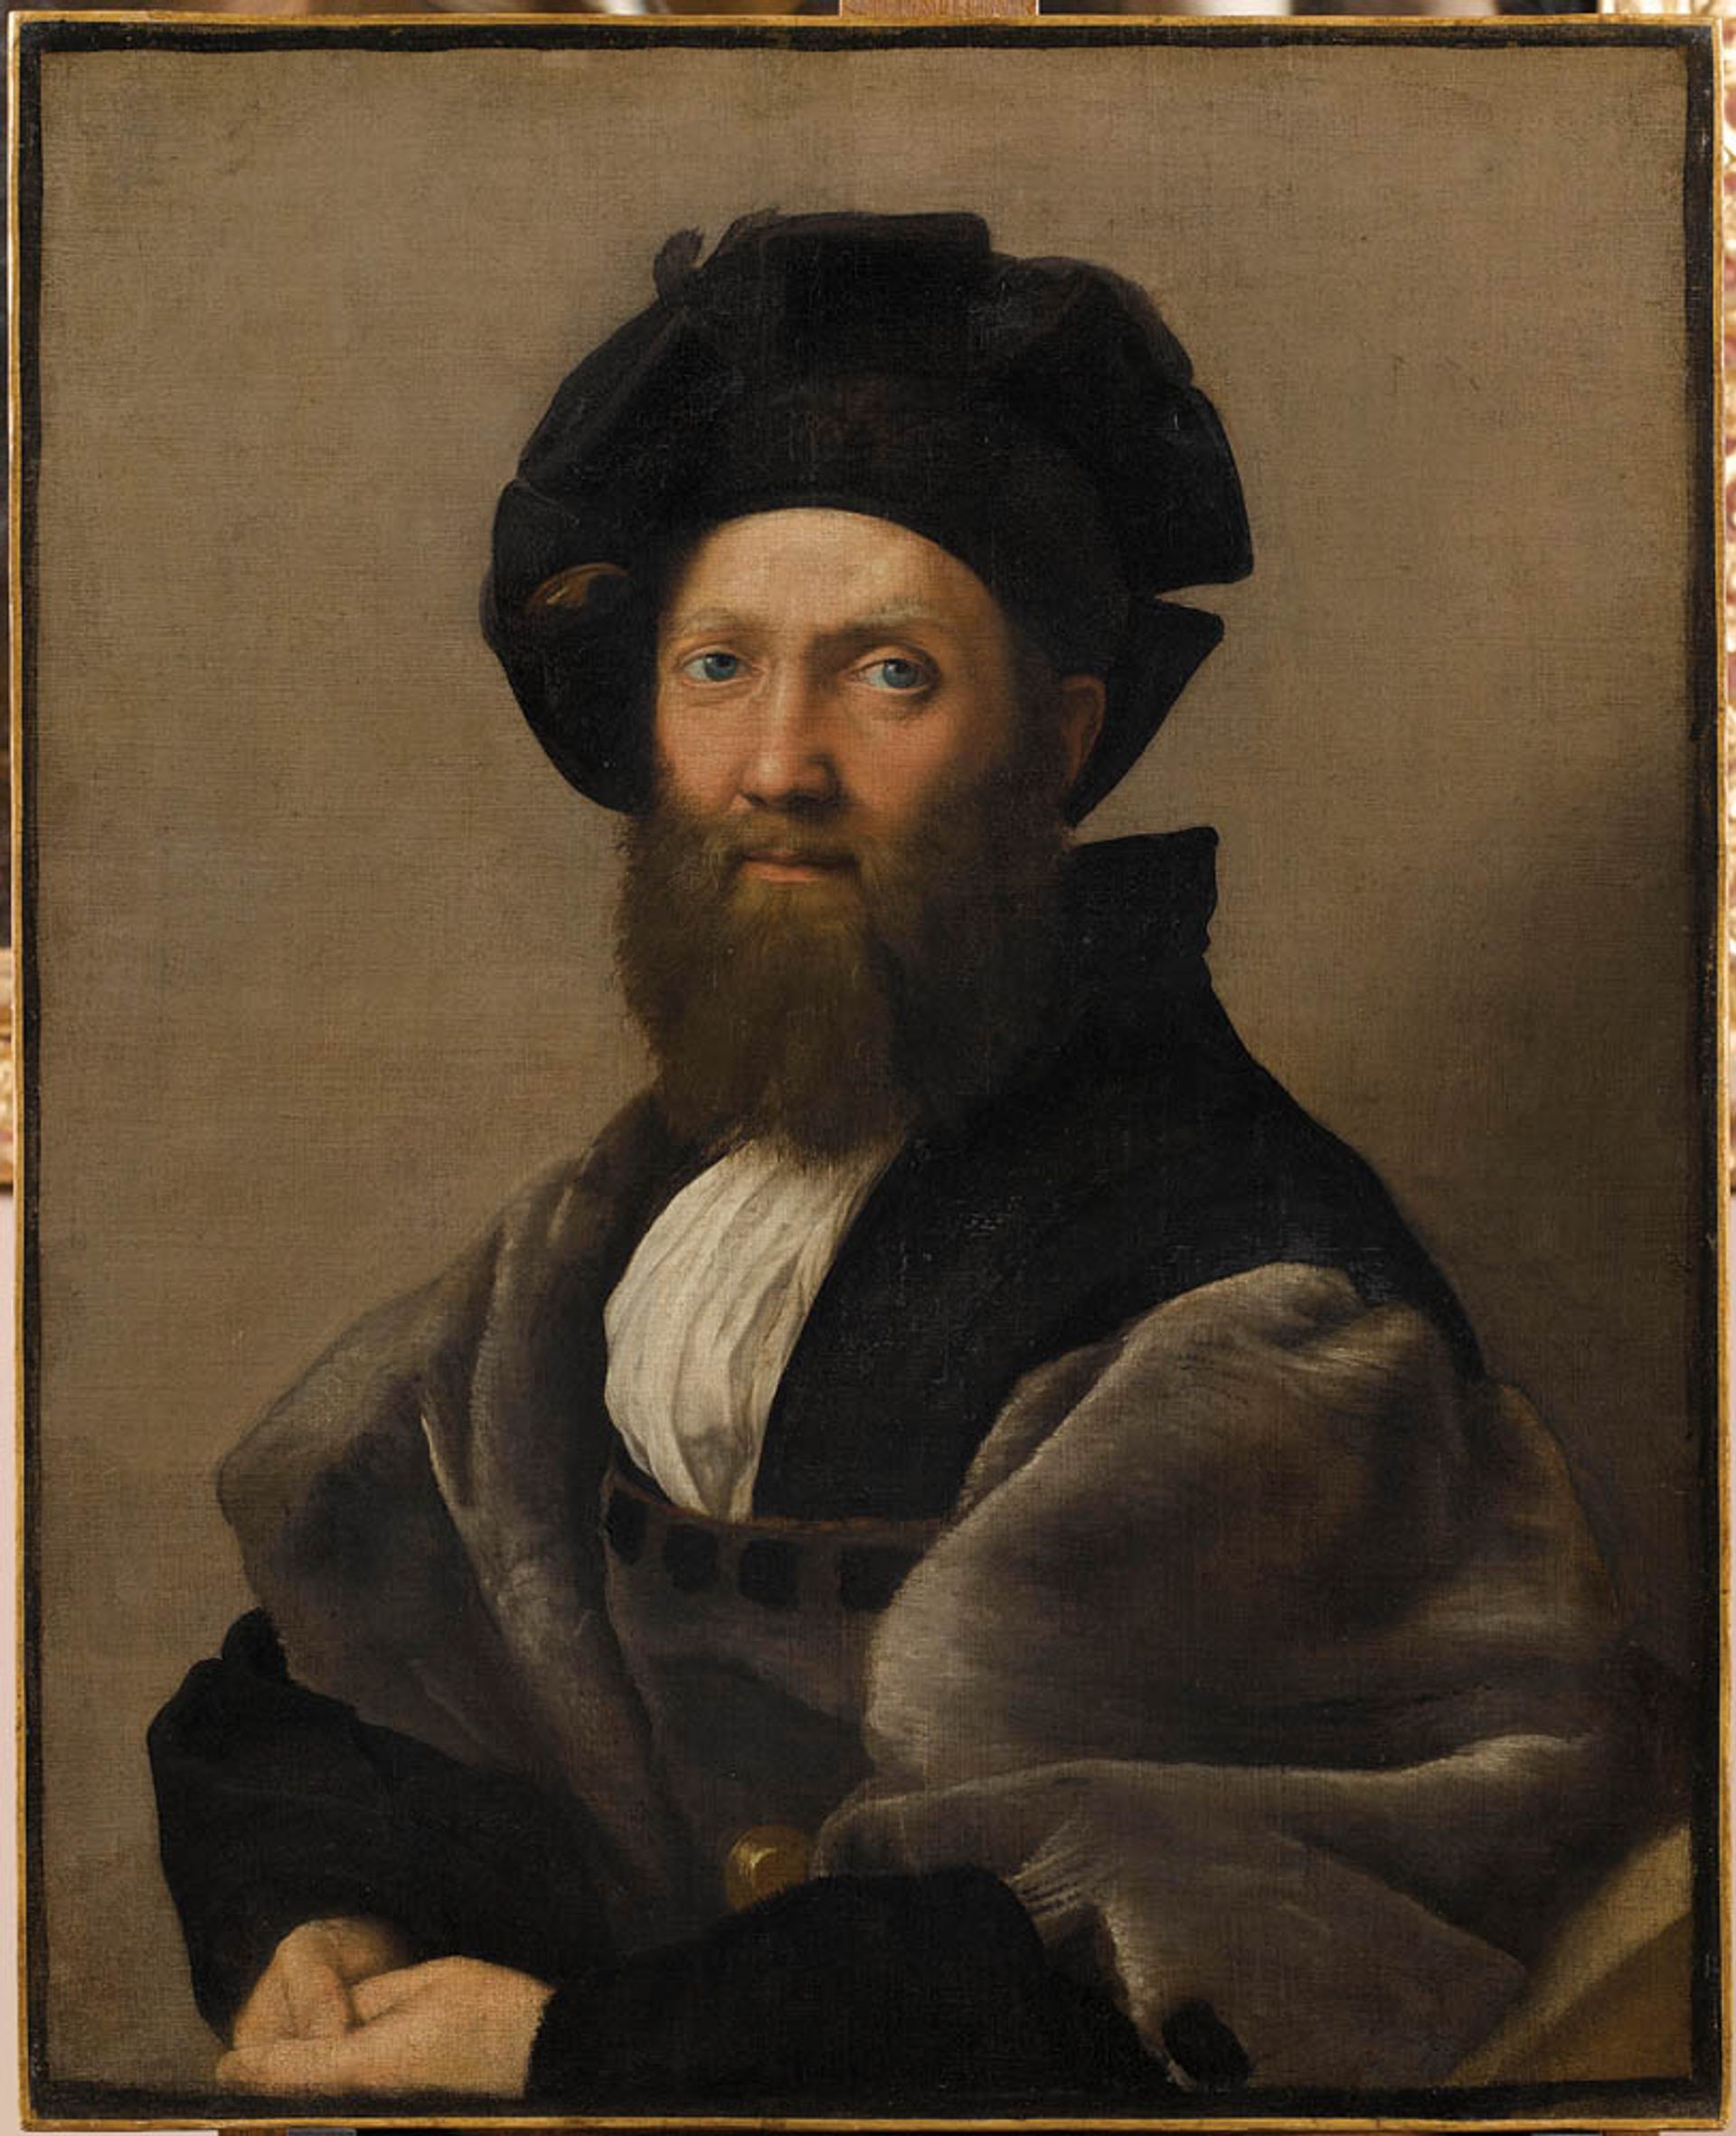 The show will highlight Raphael’s brilliance as a portraitist, seen here in his sympathetic painting of the writer Baldassare Castiglione (around 1514-15) from the Musée du Louvre © RMN-Grand Palais/Tony Querrec